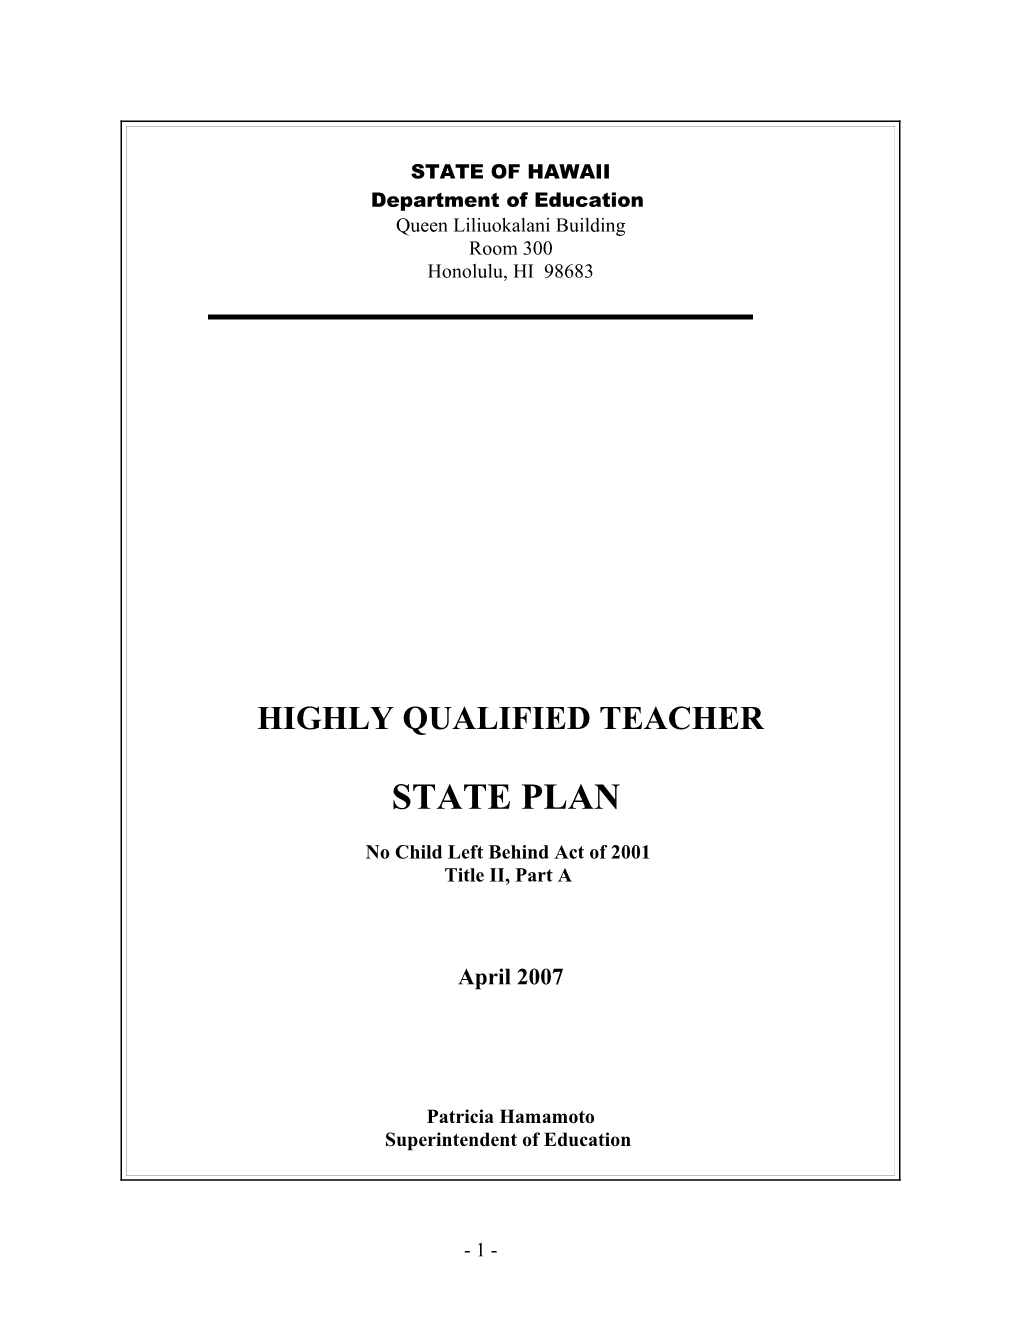 Hawaii - Revised Highly Qualified Teachers State Plan (MS WORD)